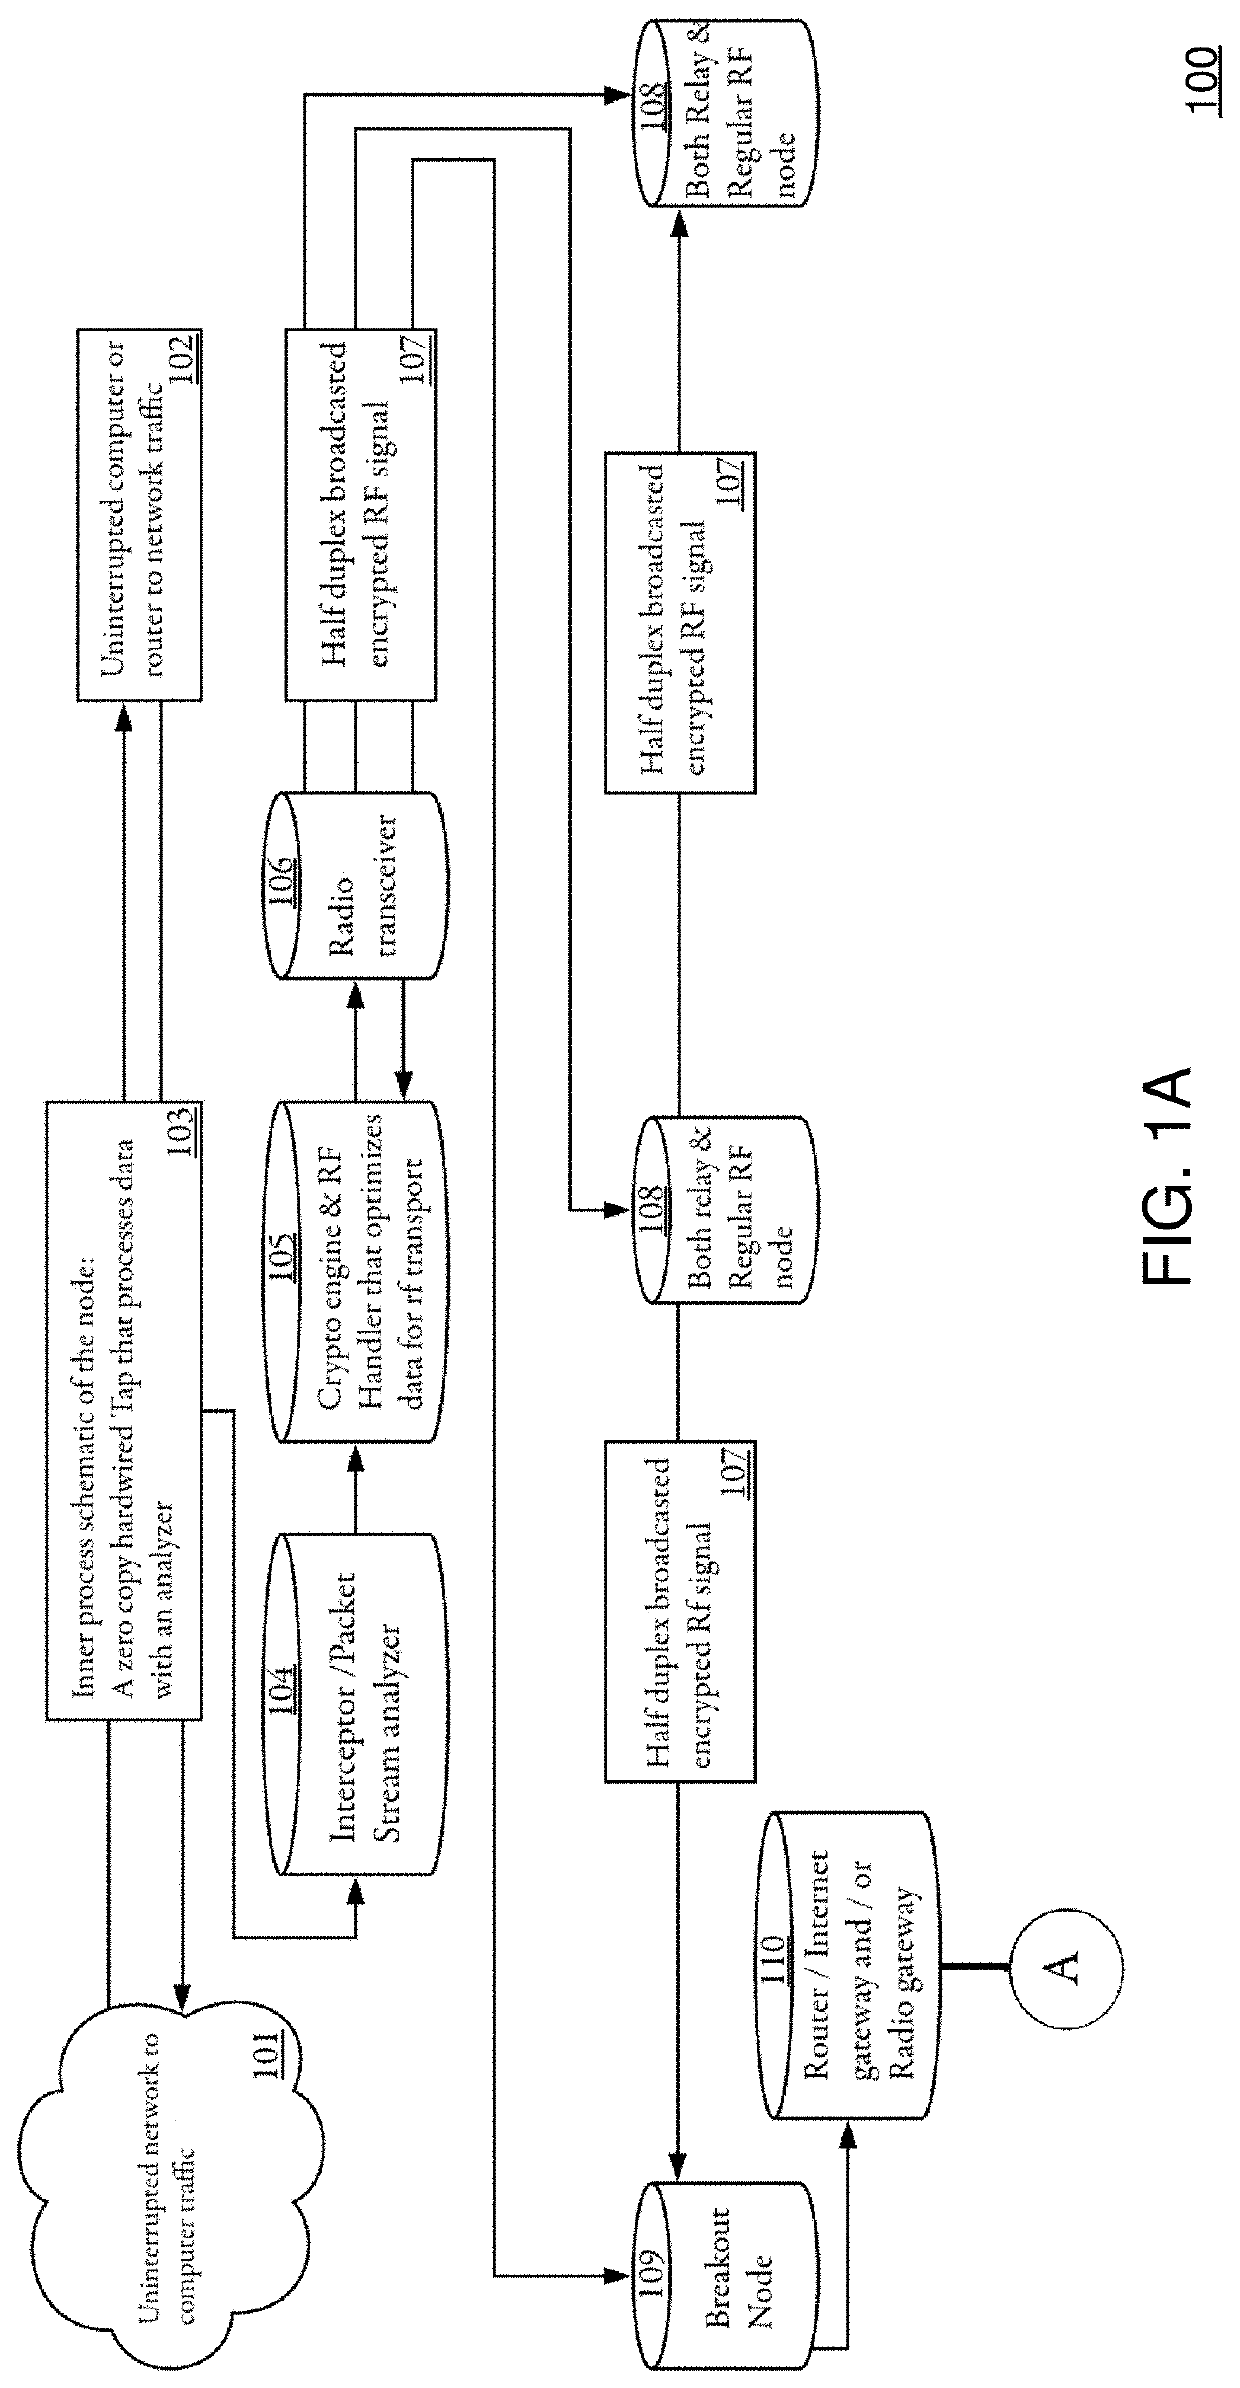 System and method employing virtual ledger with non-fungible token (NFT) generation